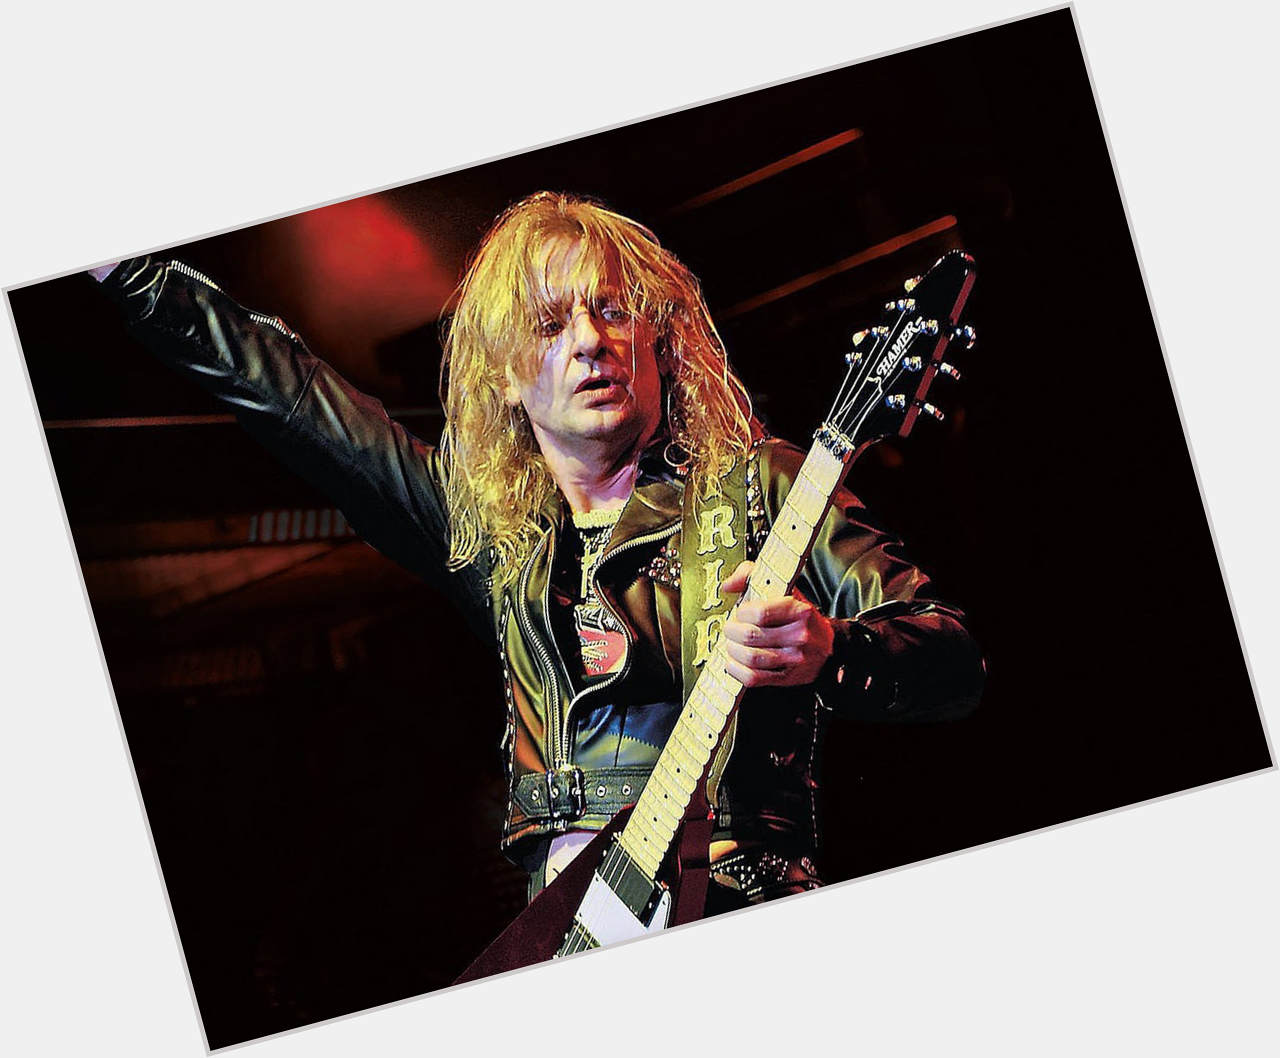 Please join us here at in wishing the one and only K.K. Downing a very Happy 69th Birthday today  